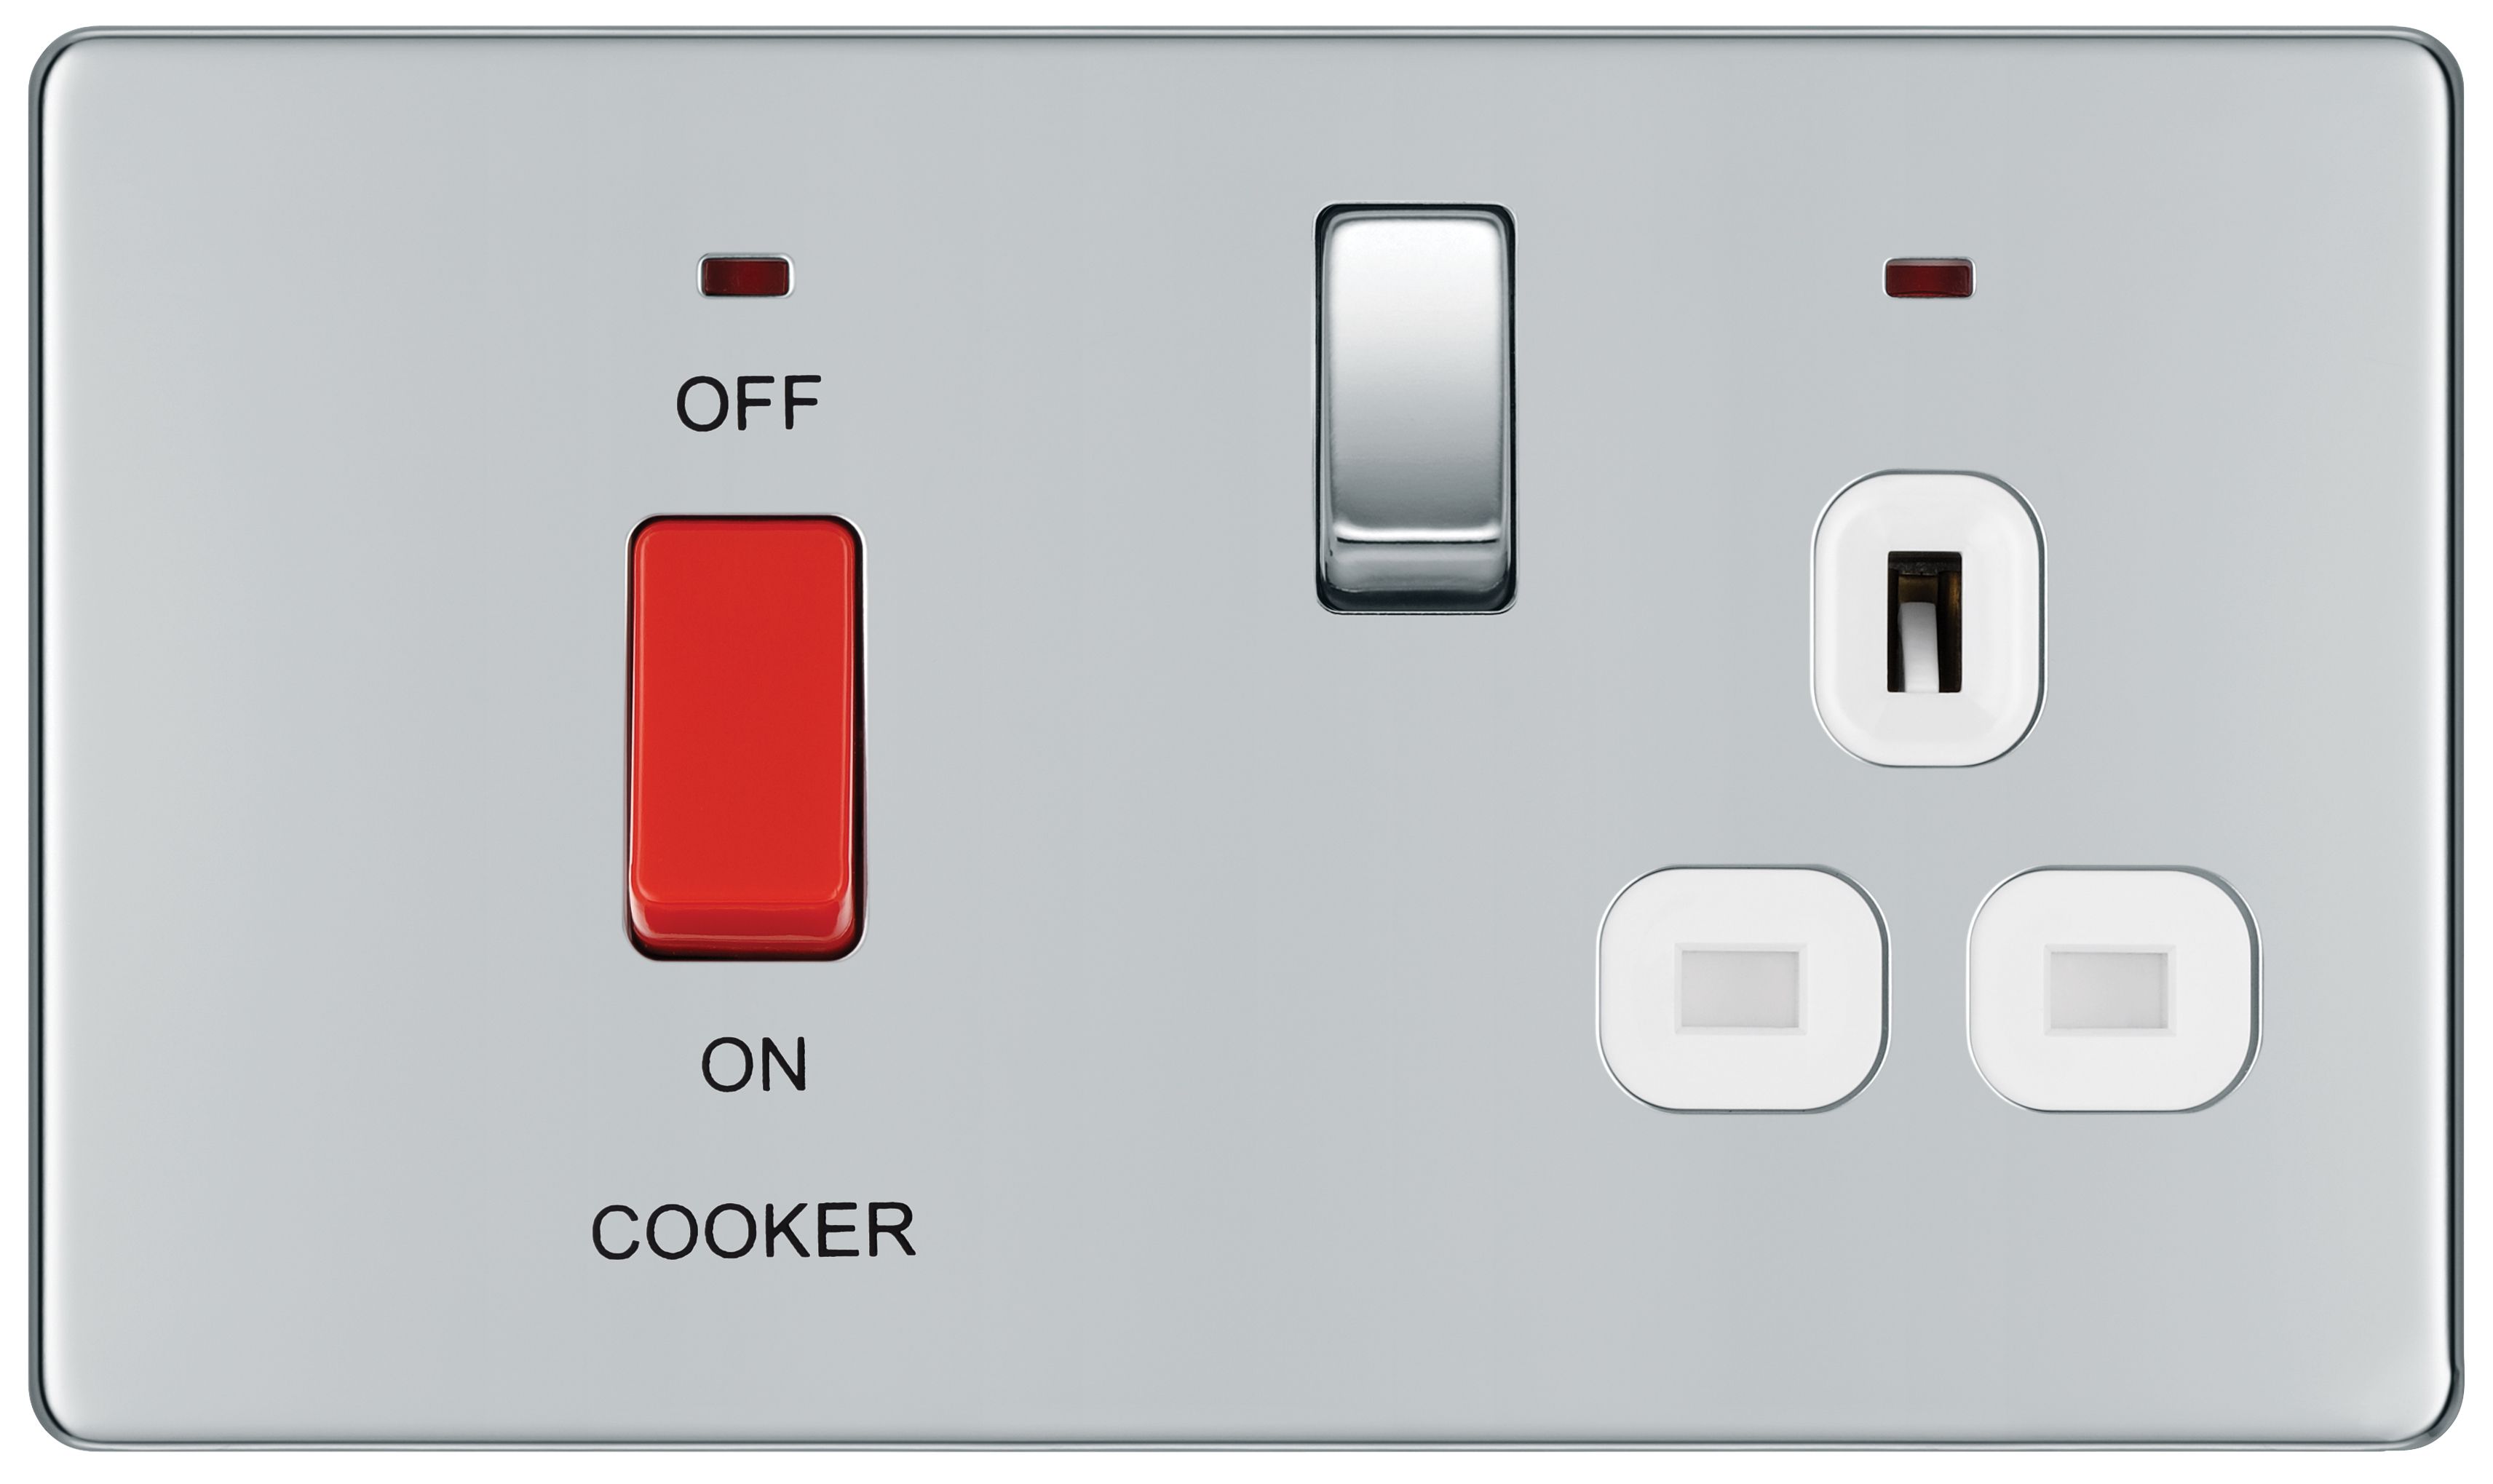 Image of BG 45 Amp Screwless Flat Plate Cooker Control Unit with Switched 13 Amp Power Socket Includes Power Indicators - Polished Chrome